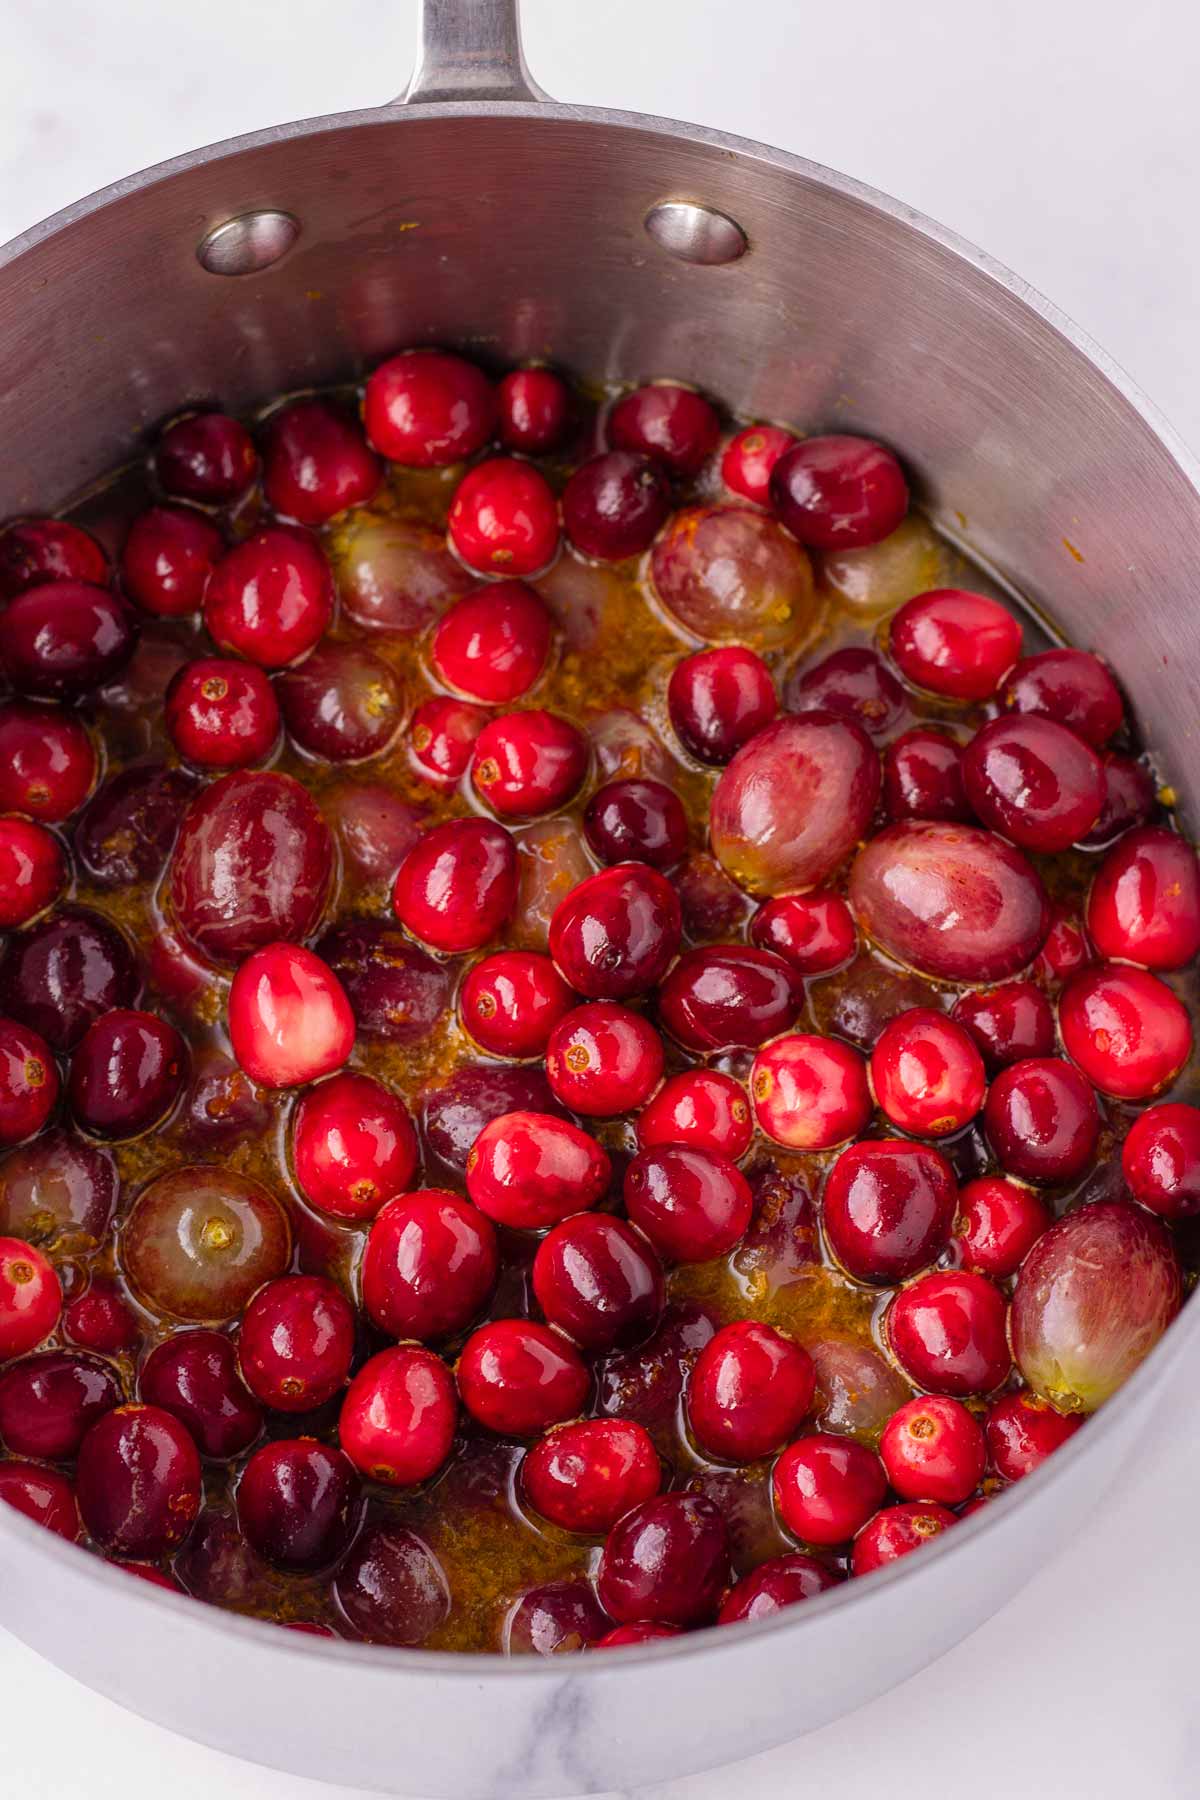 cooking cranberry sauce in a saucepan